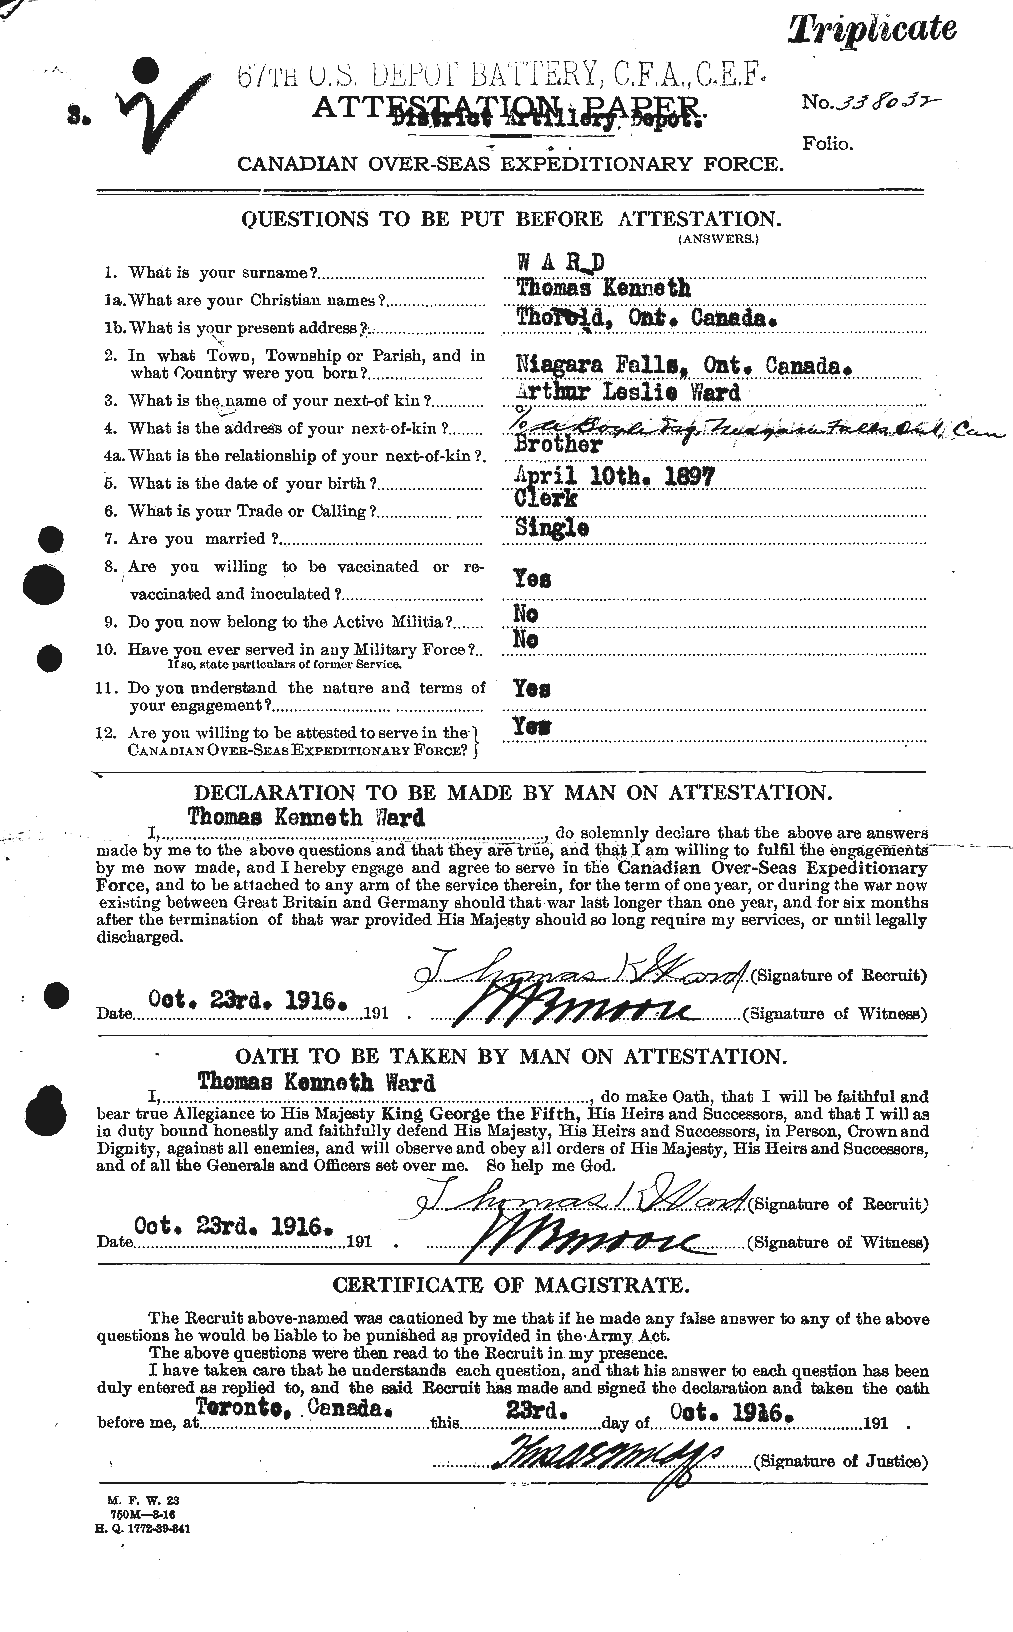 Personnel Records of the First World War - CEF 659731a